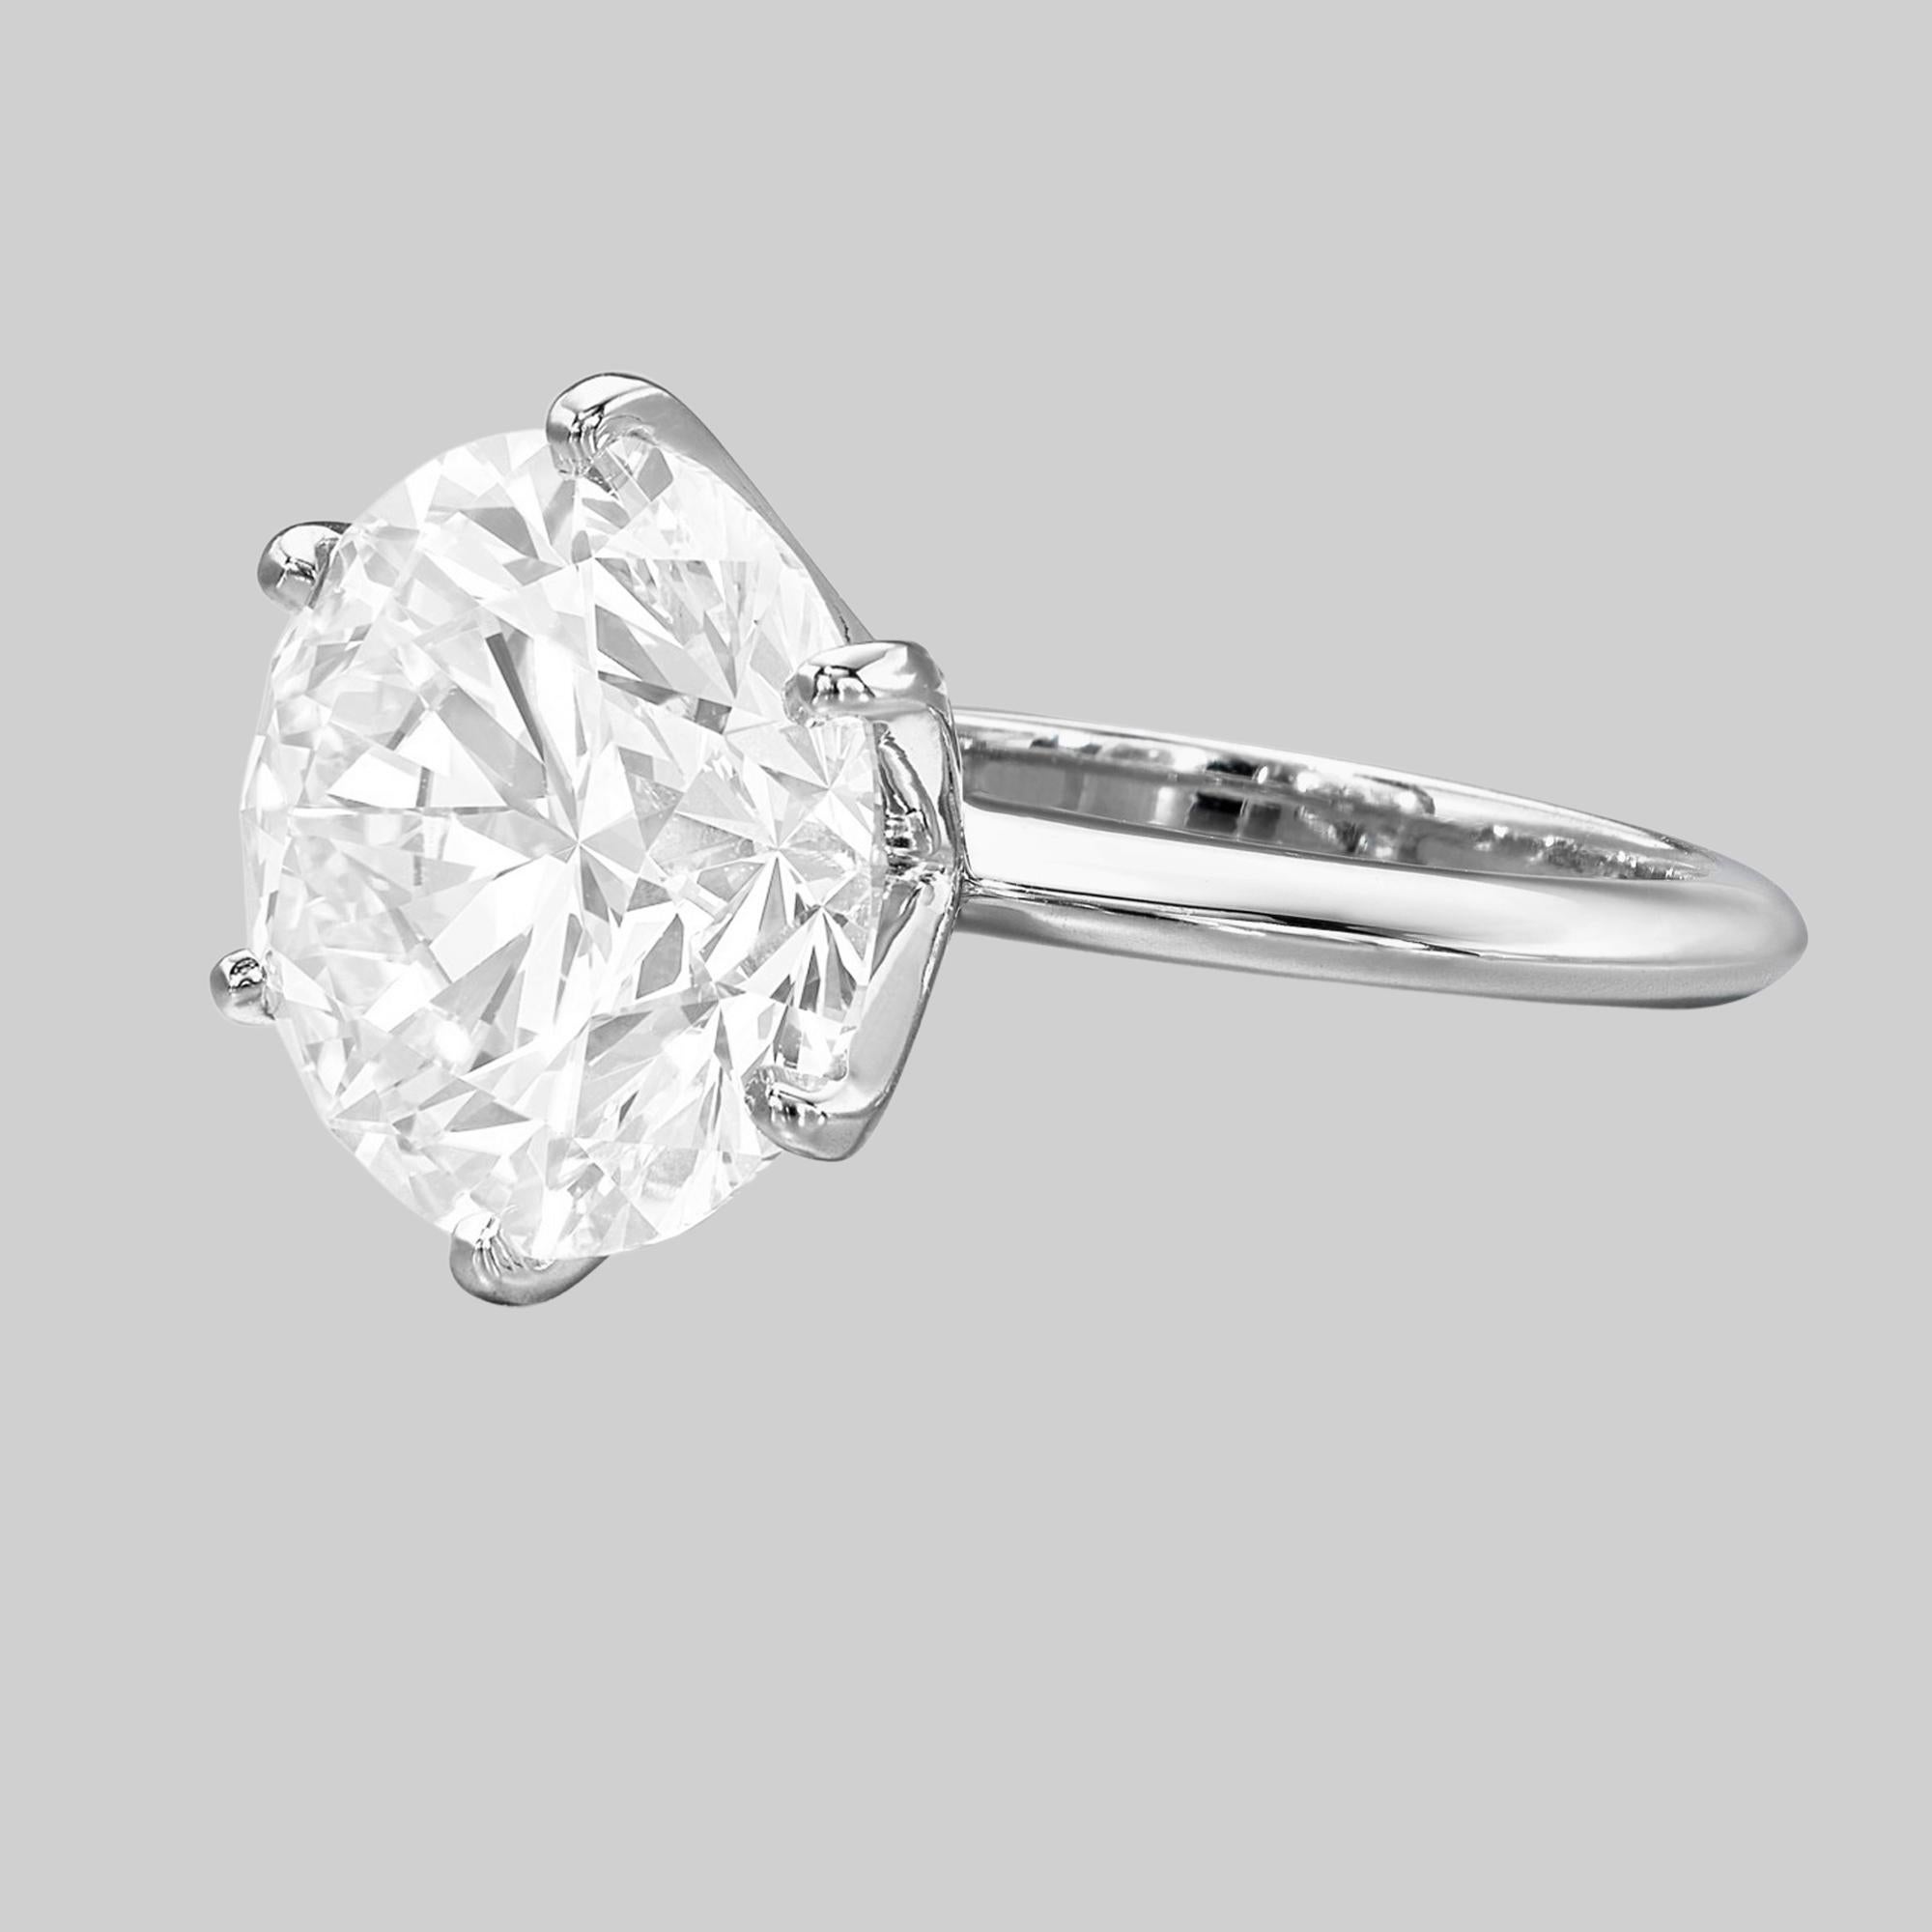 Tiffany & Co. 2.10 ct Total Weight Platinum Round Brilliant Cut Diamond Solitaire Engagement Ring. 

The ring weighs 5.7 grams, size 5.5 (sizable to most finger sizes), the center stone is a 2.1 ct Natural Round Brilliant Cut diamond, I in color,